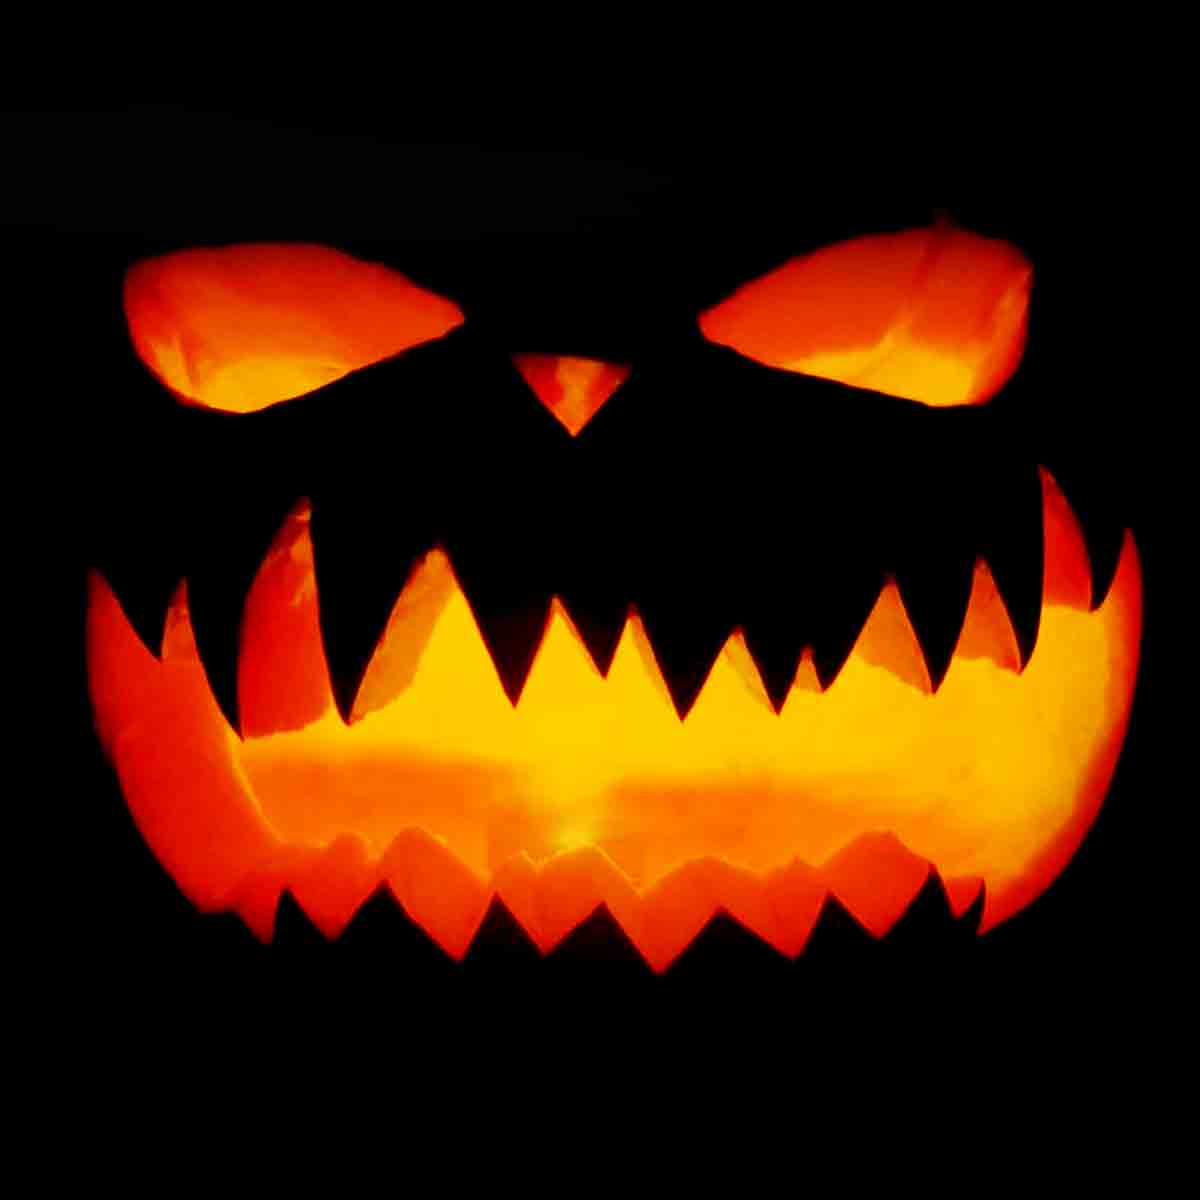 25 Halloween Scary Face Pumpkin Carving Ideas 2020 For Kids & Adults